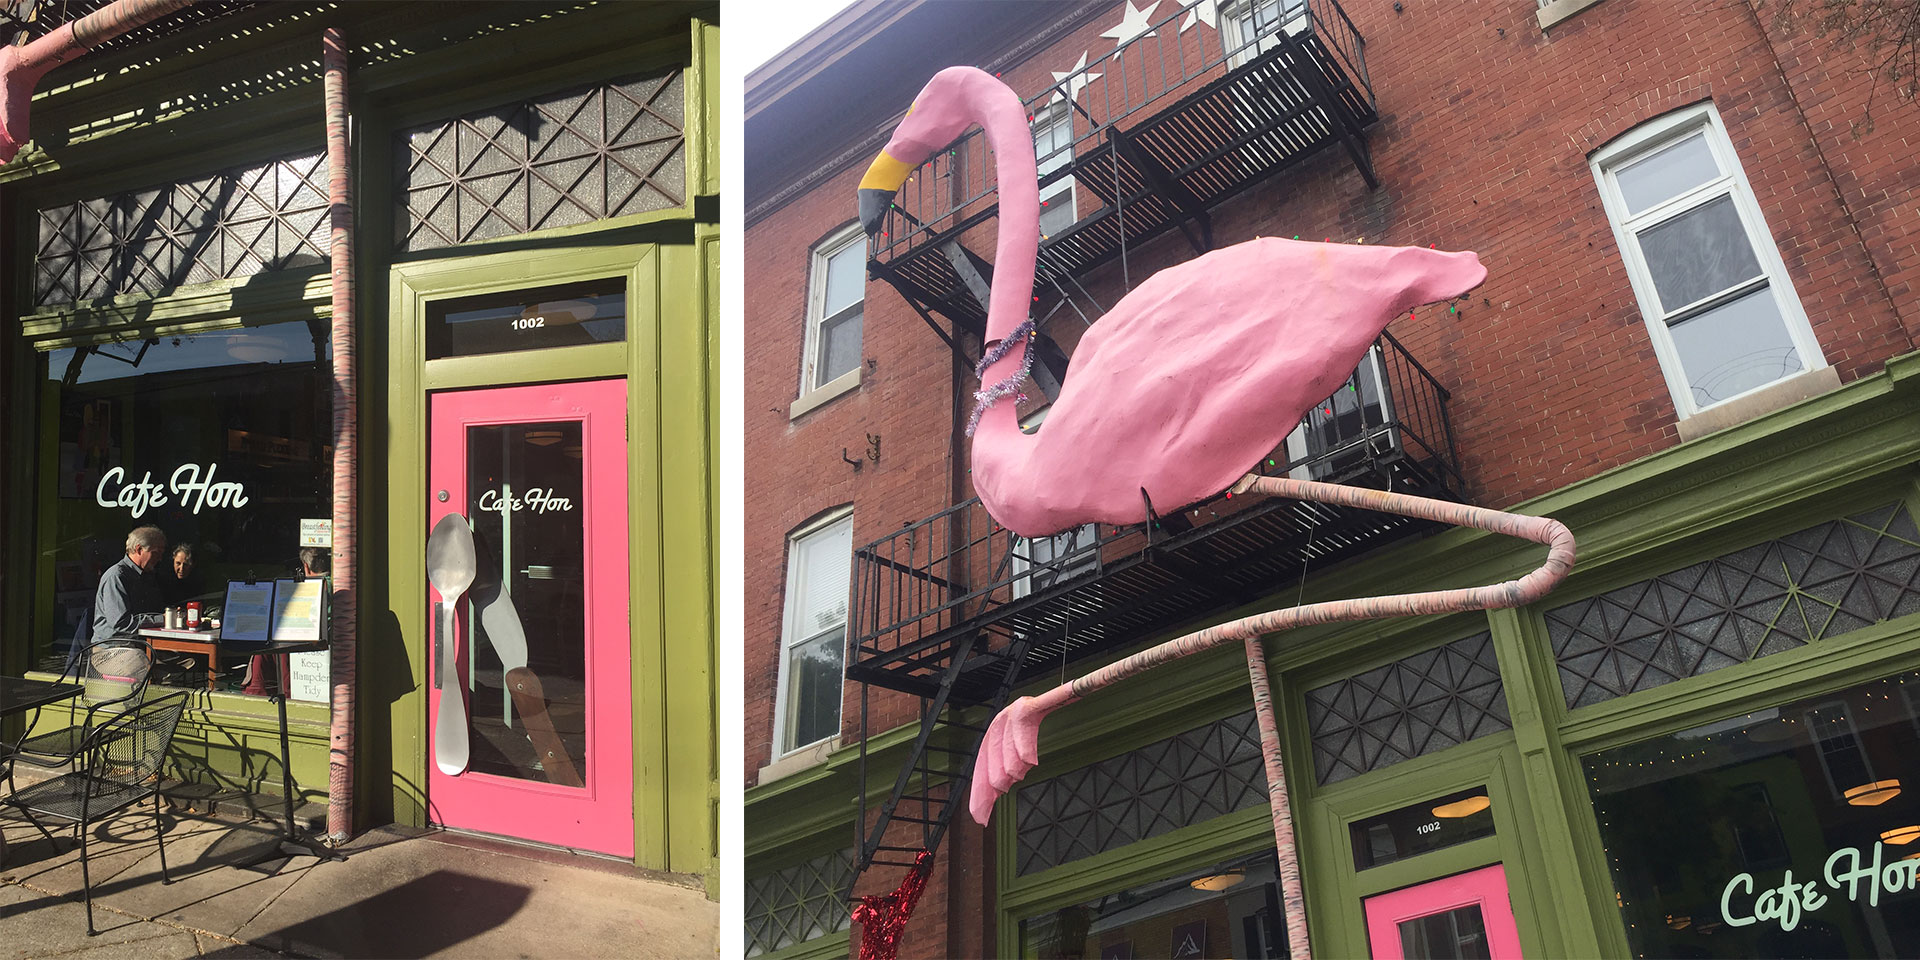 In Search of Offbeat Baltimore? Here’s Where to Get Quirky in Charm City